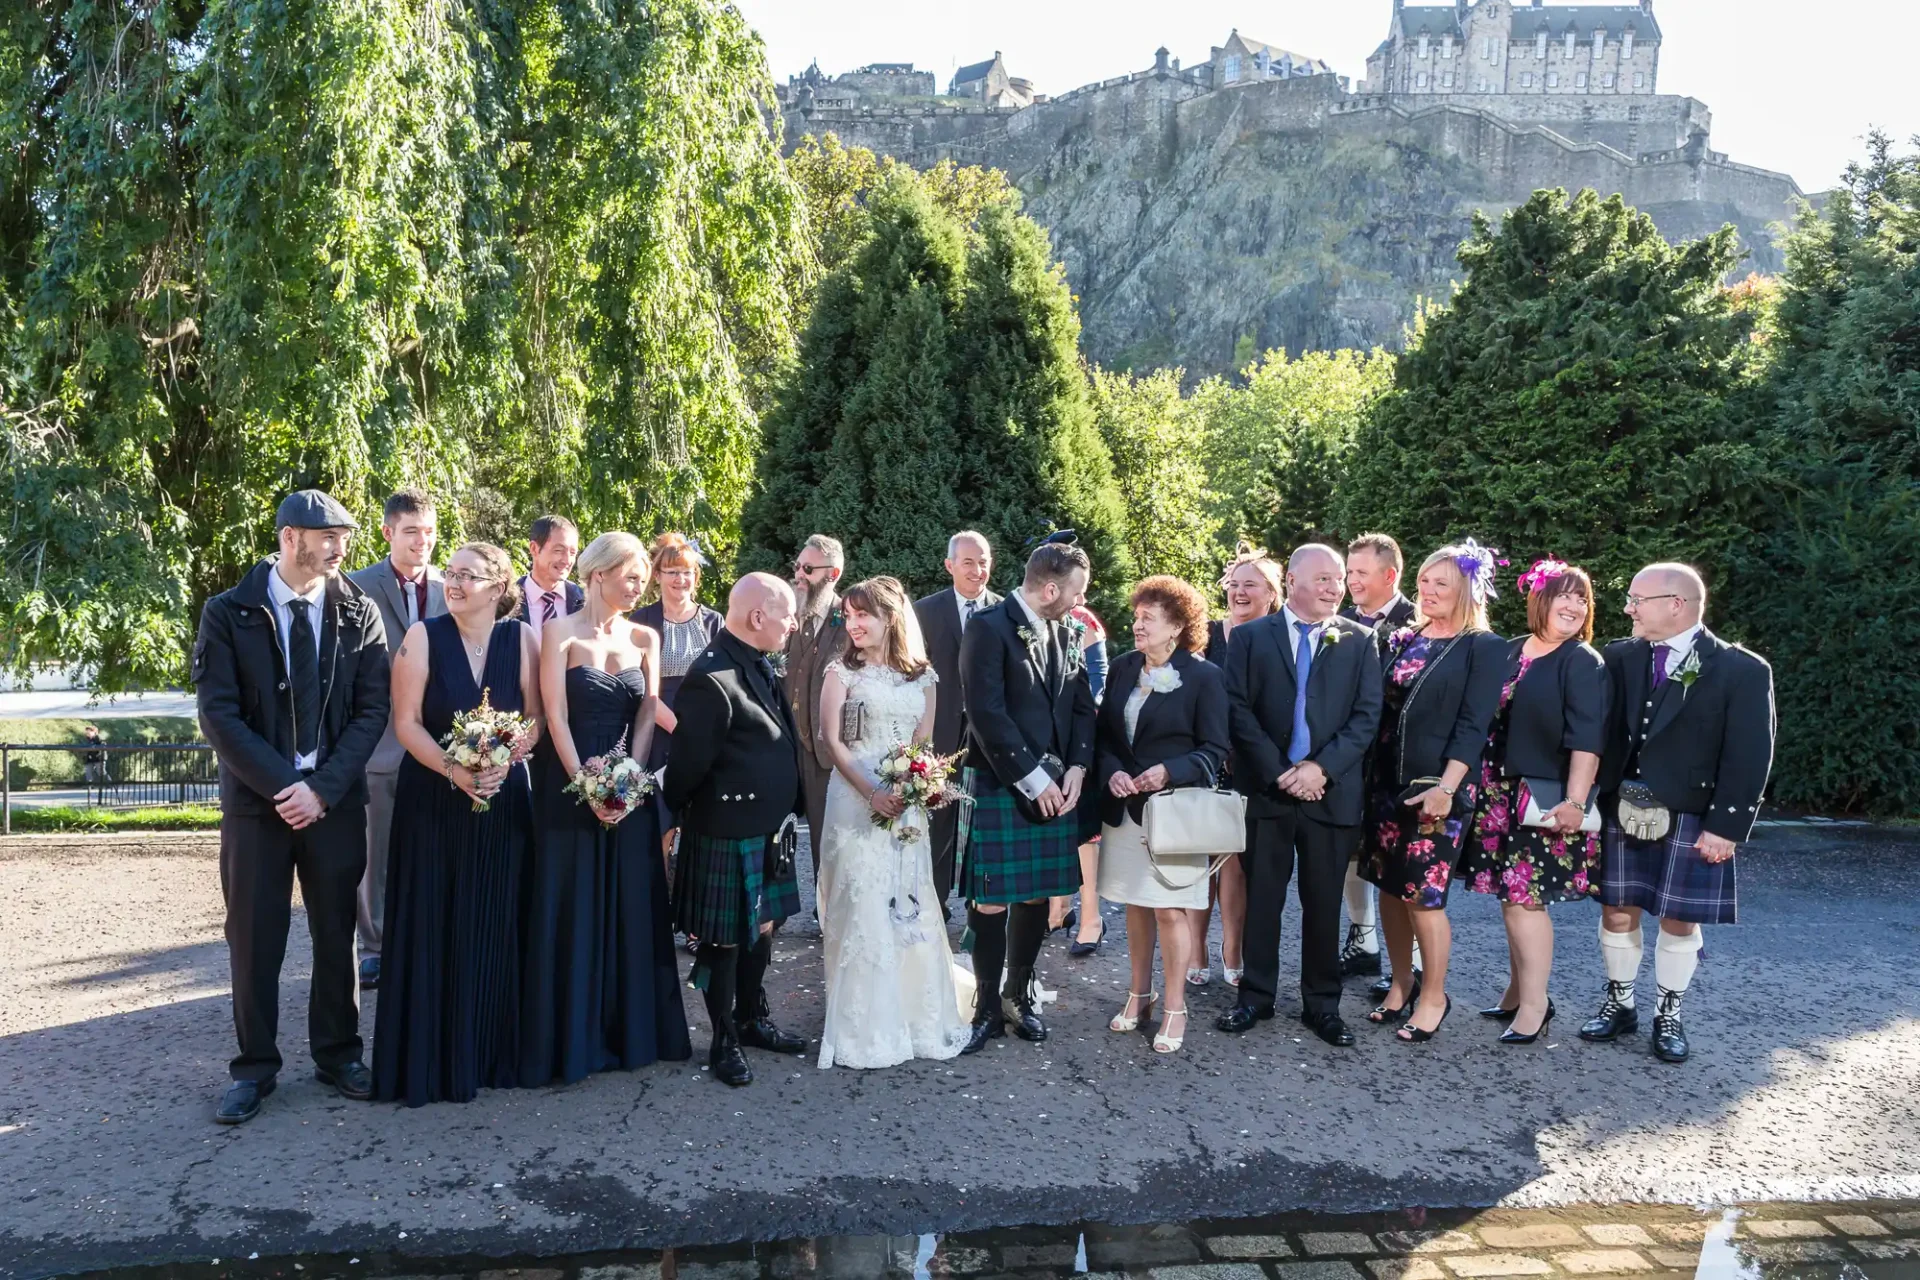 Wedding group photo with the bride, groom, and guests in formal attire, some in kilts, with edinburgh castle in the backdrop.